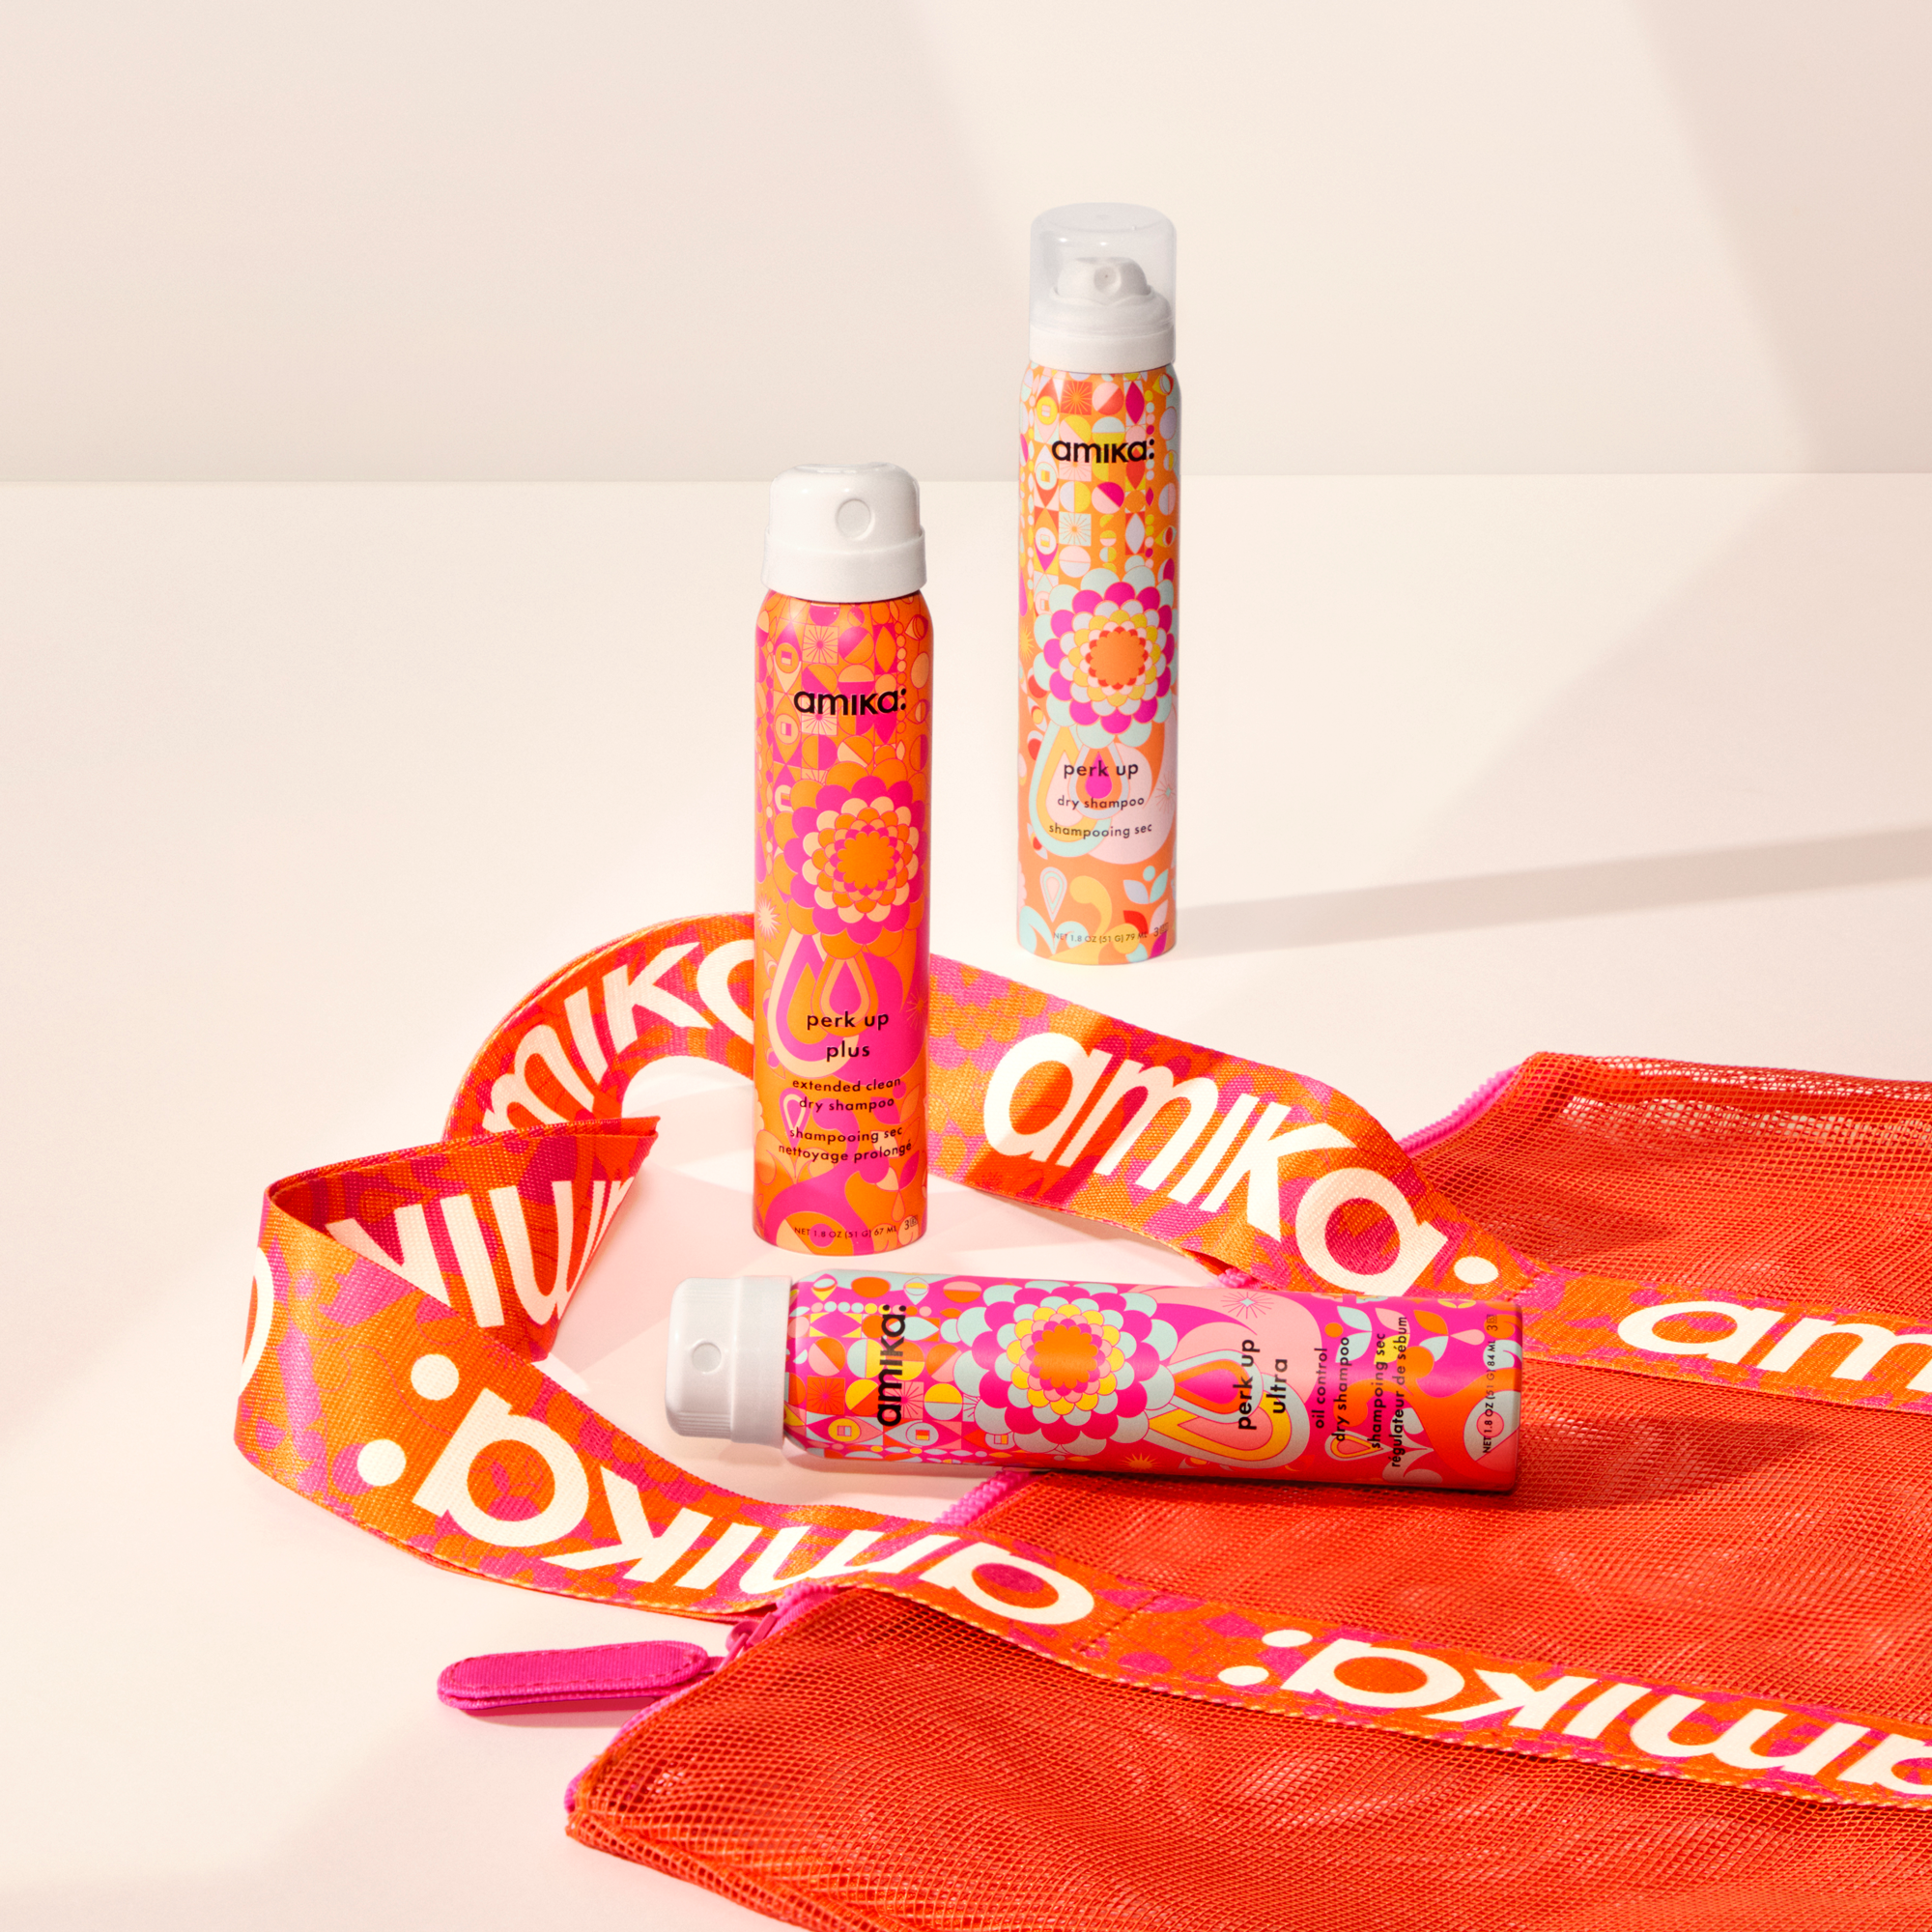 amika limited time gift with purchase: 3 travel sized dry shampoos: perk up, perk up ultra, and  perk up plus, along with a mesh beach tote bag with amika logo handles